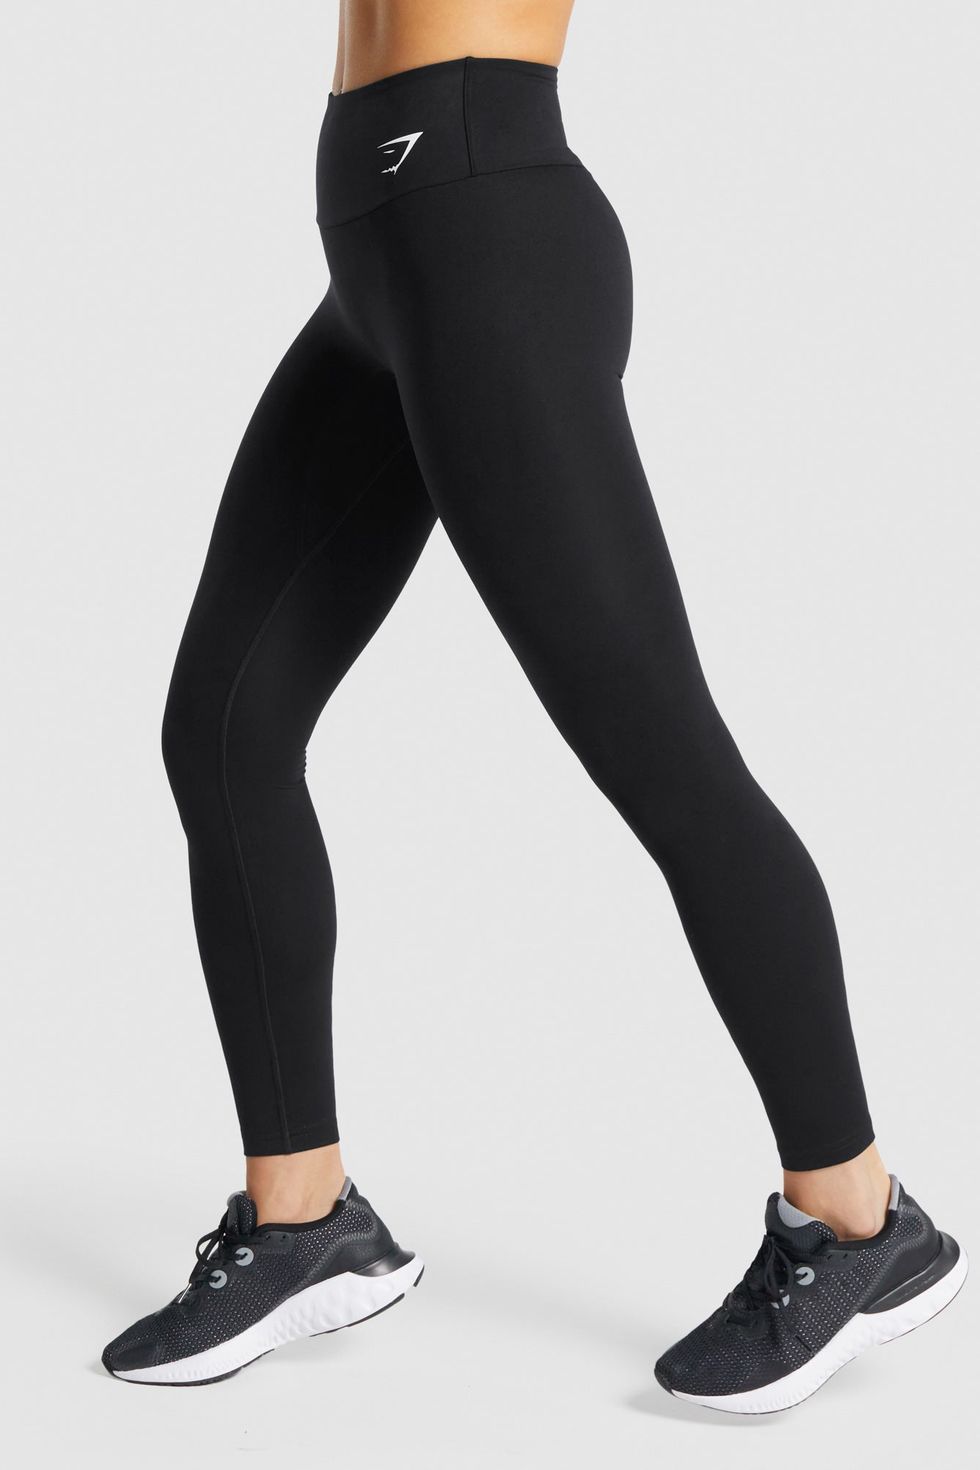 Gymshark leggings - Buy the best product with free shipping on